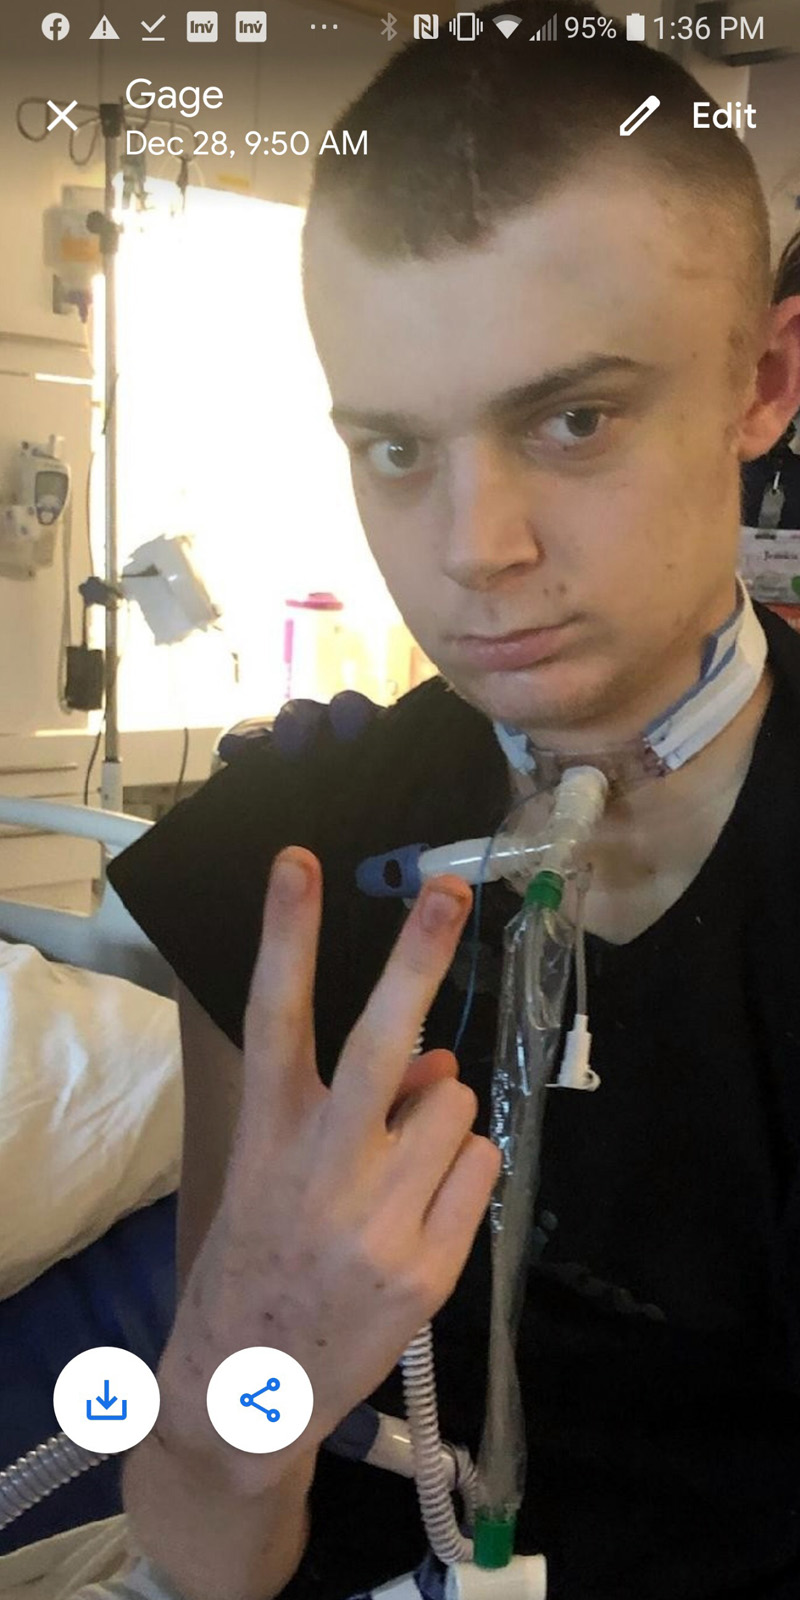 Gage York flashes a peace sign from his hospital room at Maine Medical Center in Portland on Dec. 28. York was in critical condition for almost two weeks after a Dec. 8 crash. (Photo courtesy Mary York)